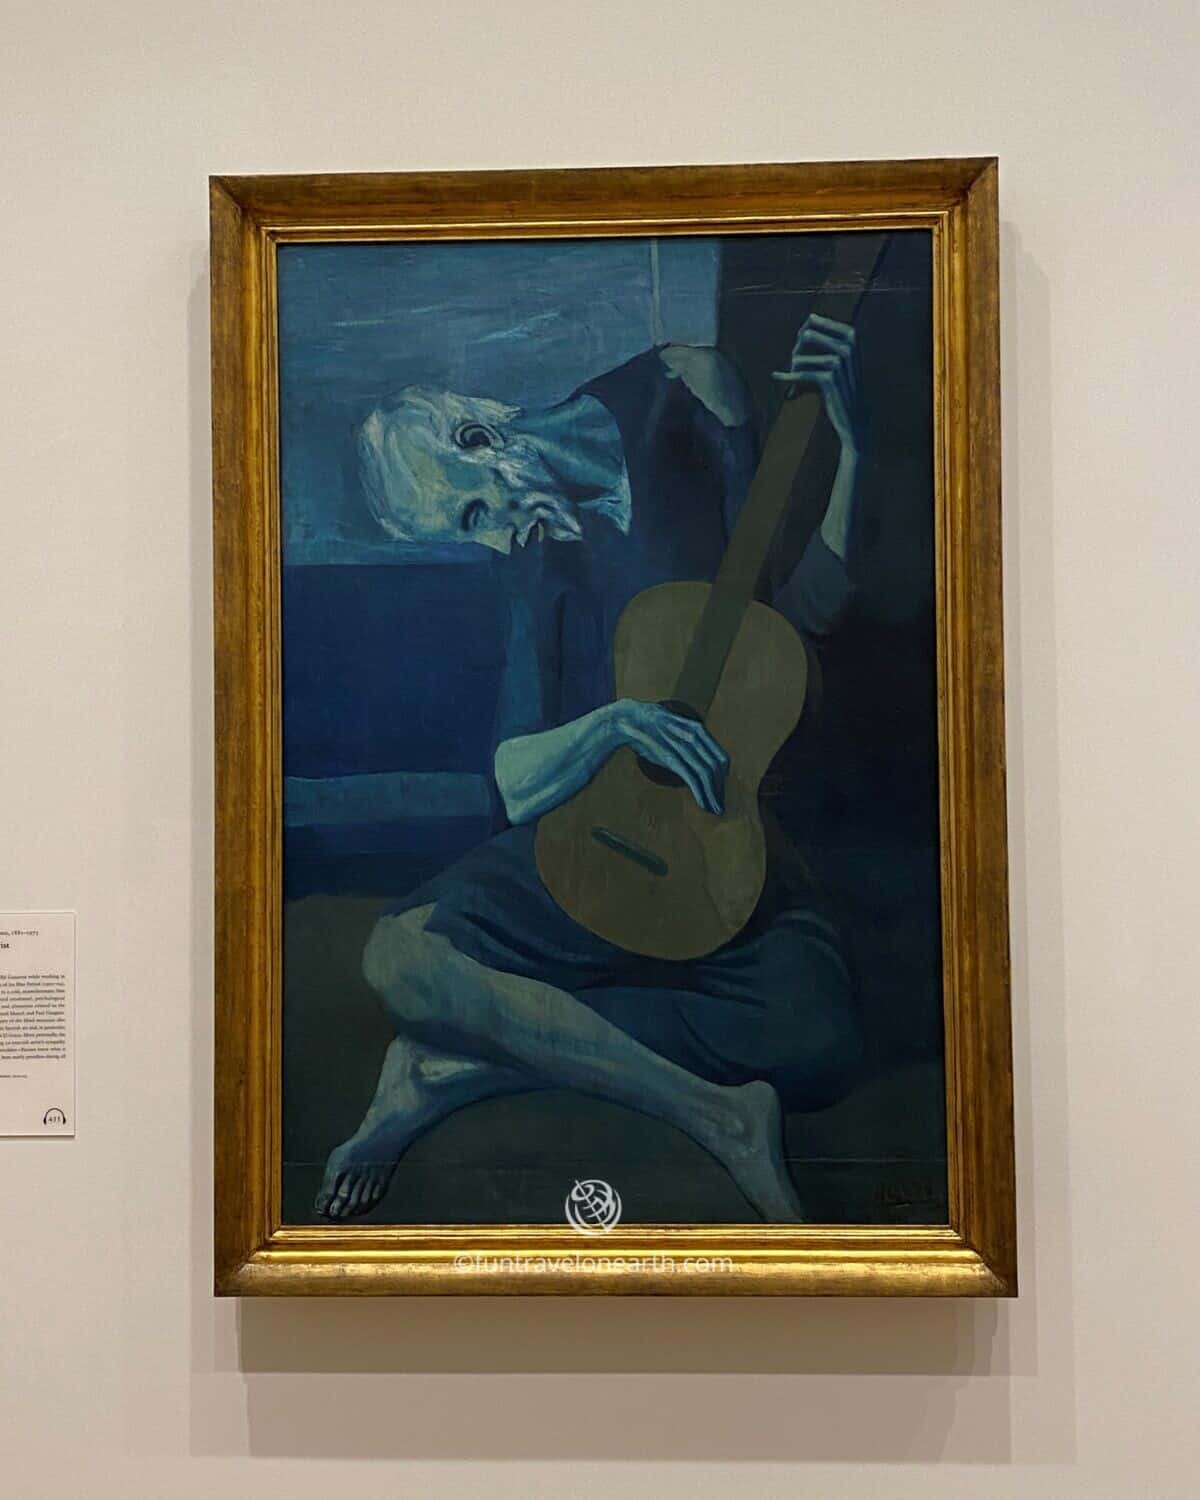 Pablo Picasso "The Old Guitarist ,The Art Institute of Chicago